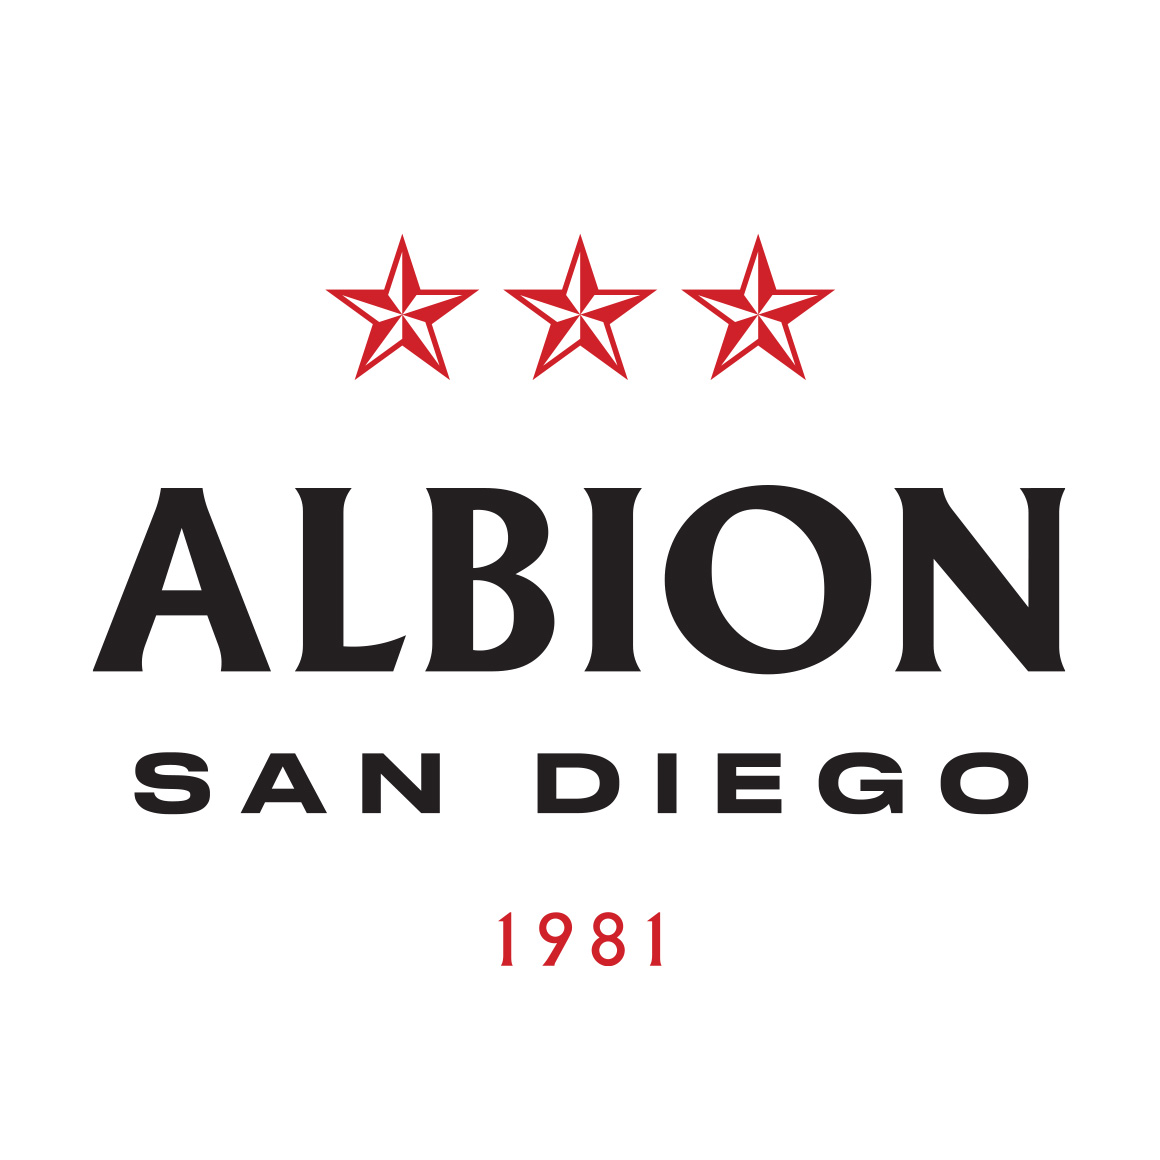 Albion Shield logo design by logo designer Joshua Berman Design for your inspiration and for the worlds largest logo competition